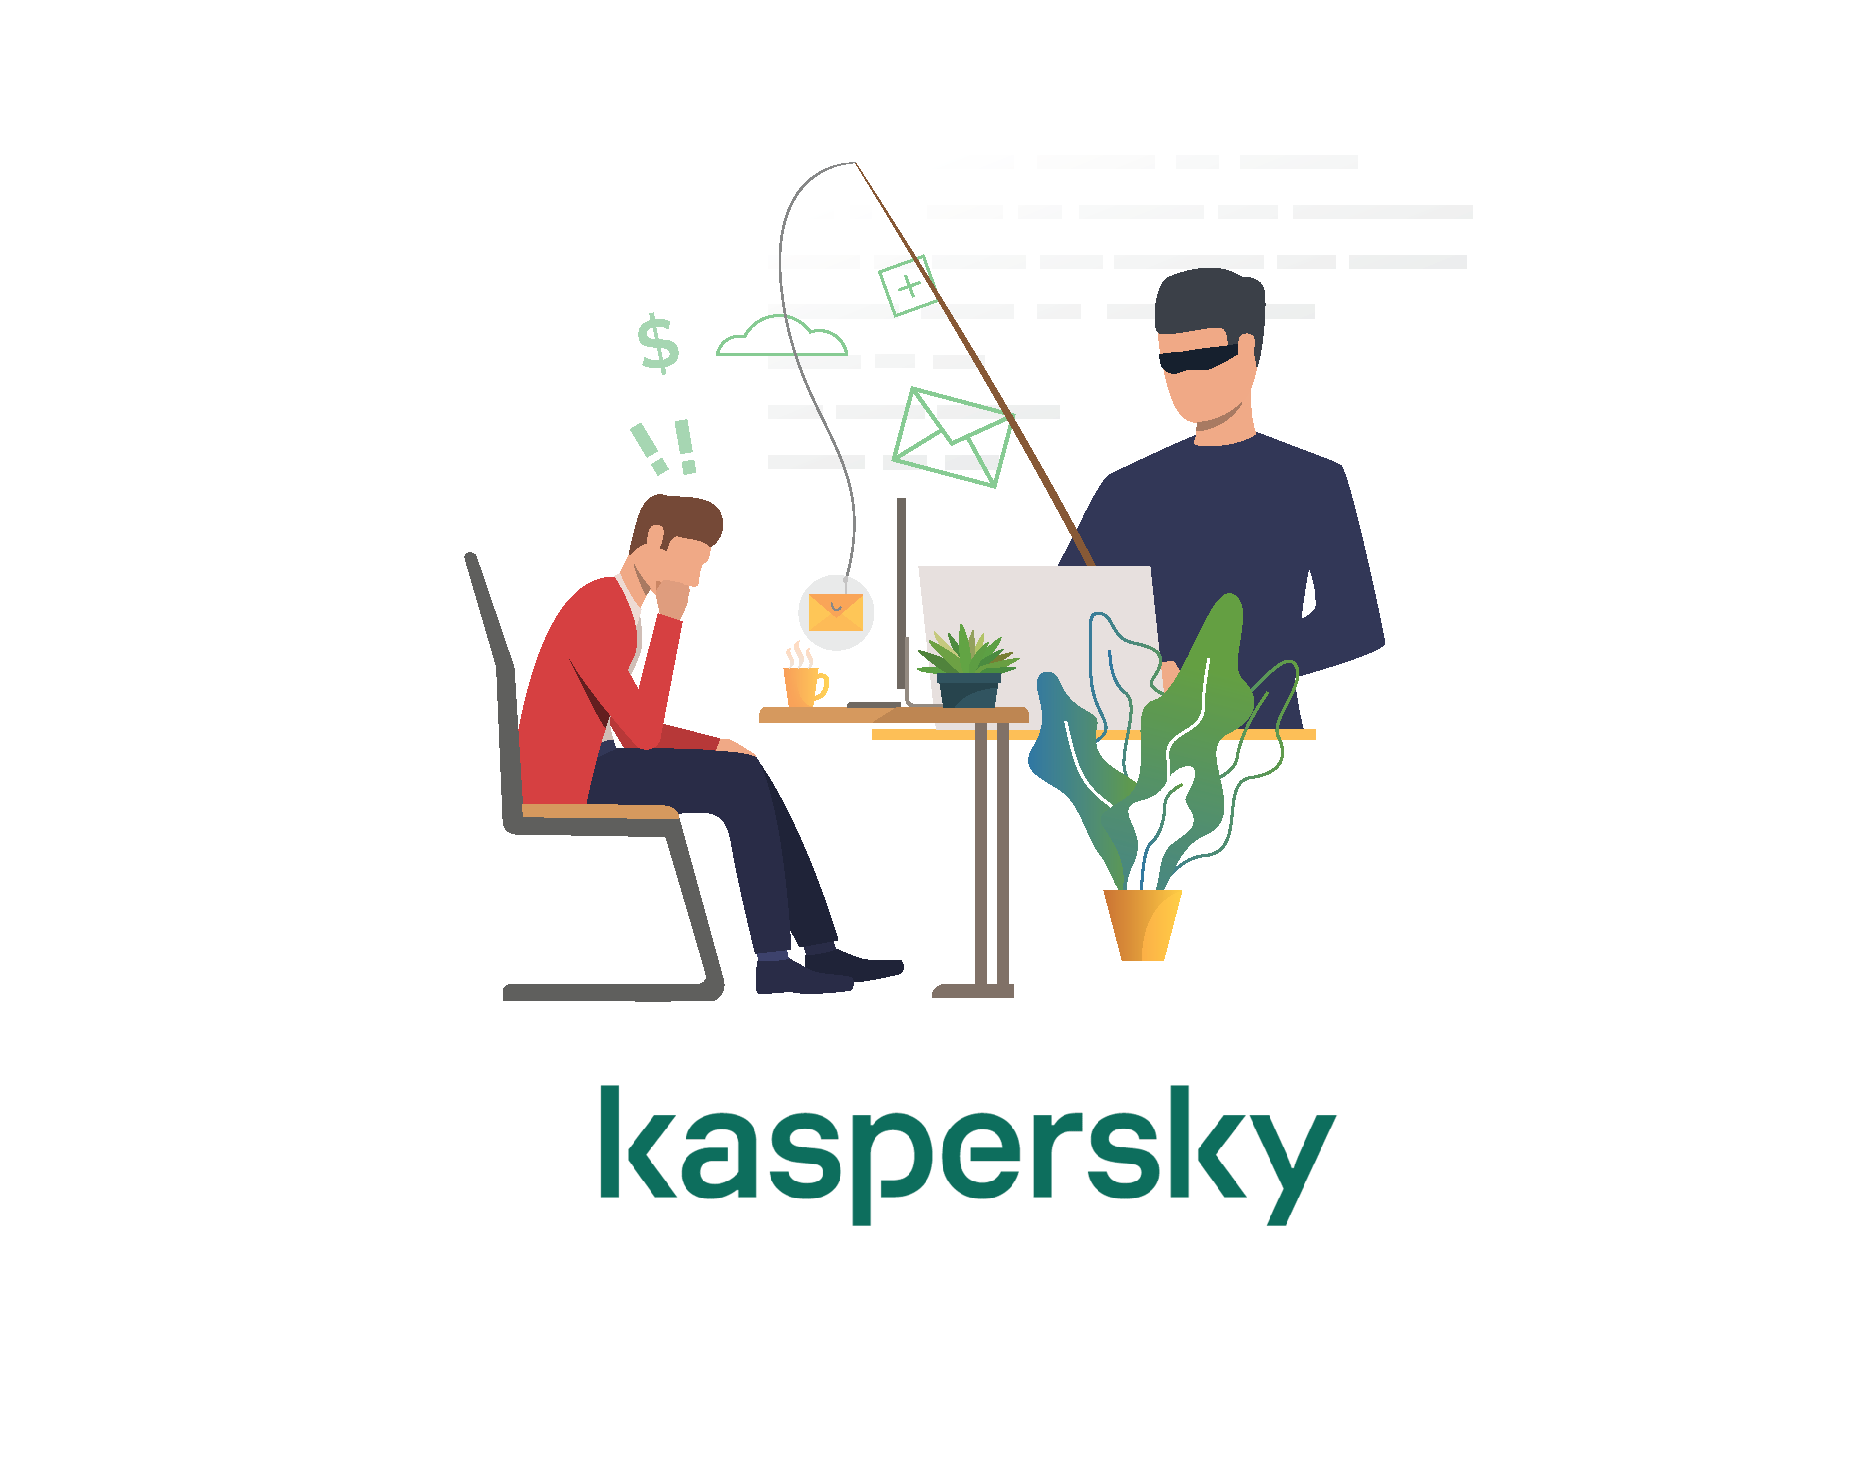 Best bite: Kaspersky reveals phishing emails that employees find most confusing